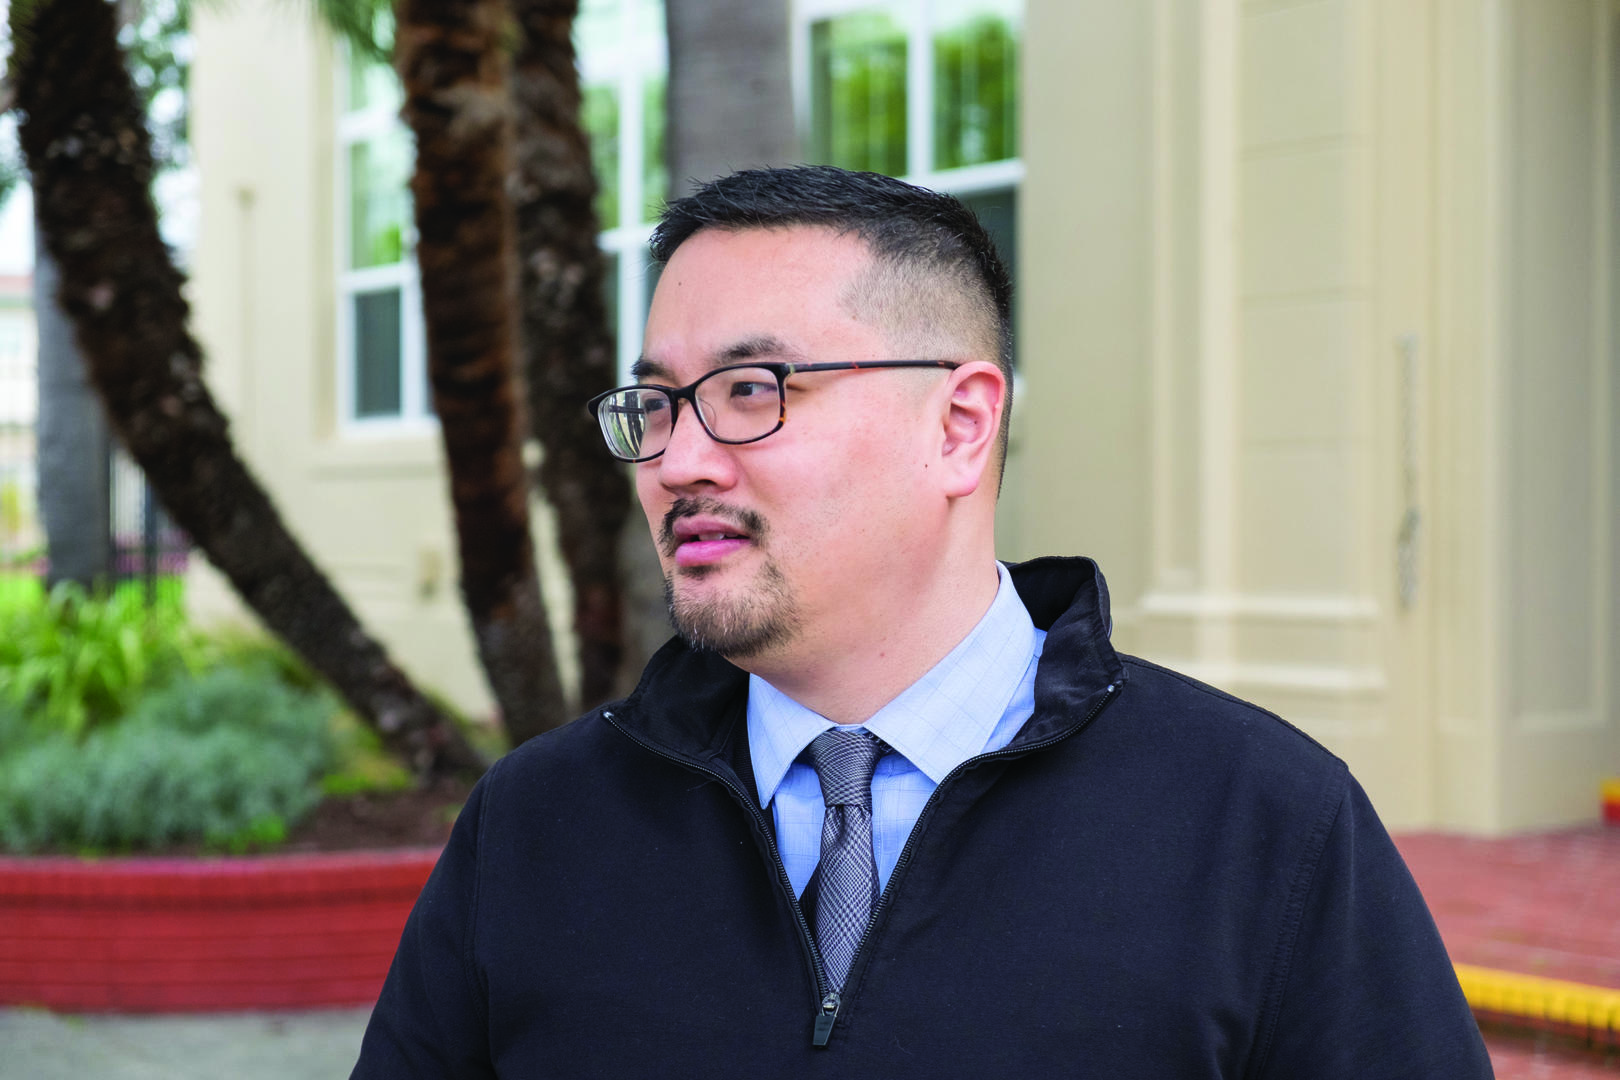 Chris Trinidad, the vice president of Cristo Rey De la Salle, came to the school from a position at St. Mary’s High School in Berkeley (photo: Sage Baggott).